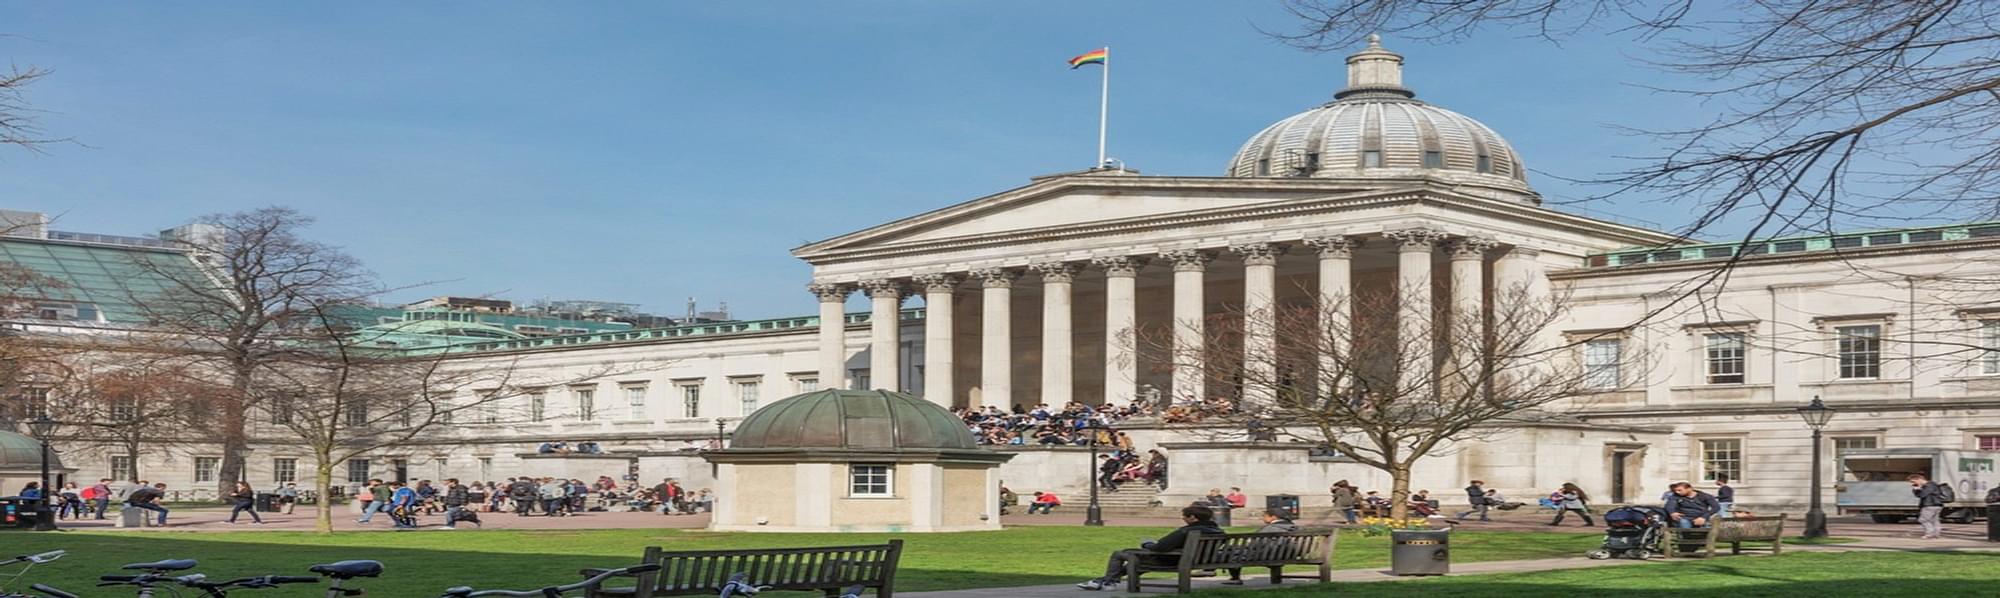 University College London 2021-2022 Admissions: Entry Requirements,  Deadlines, Application Process